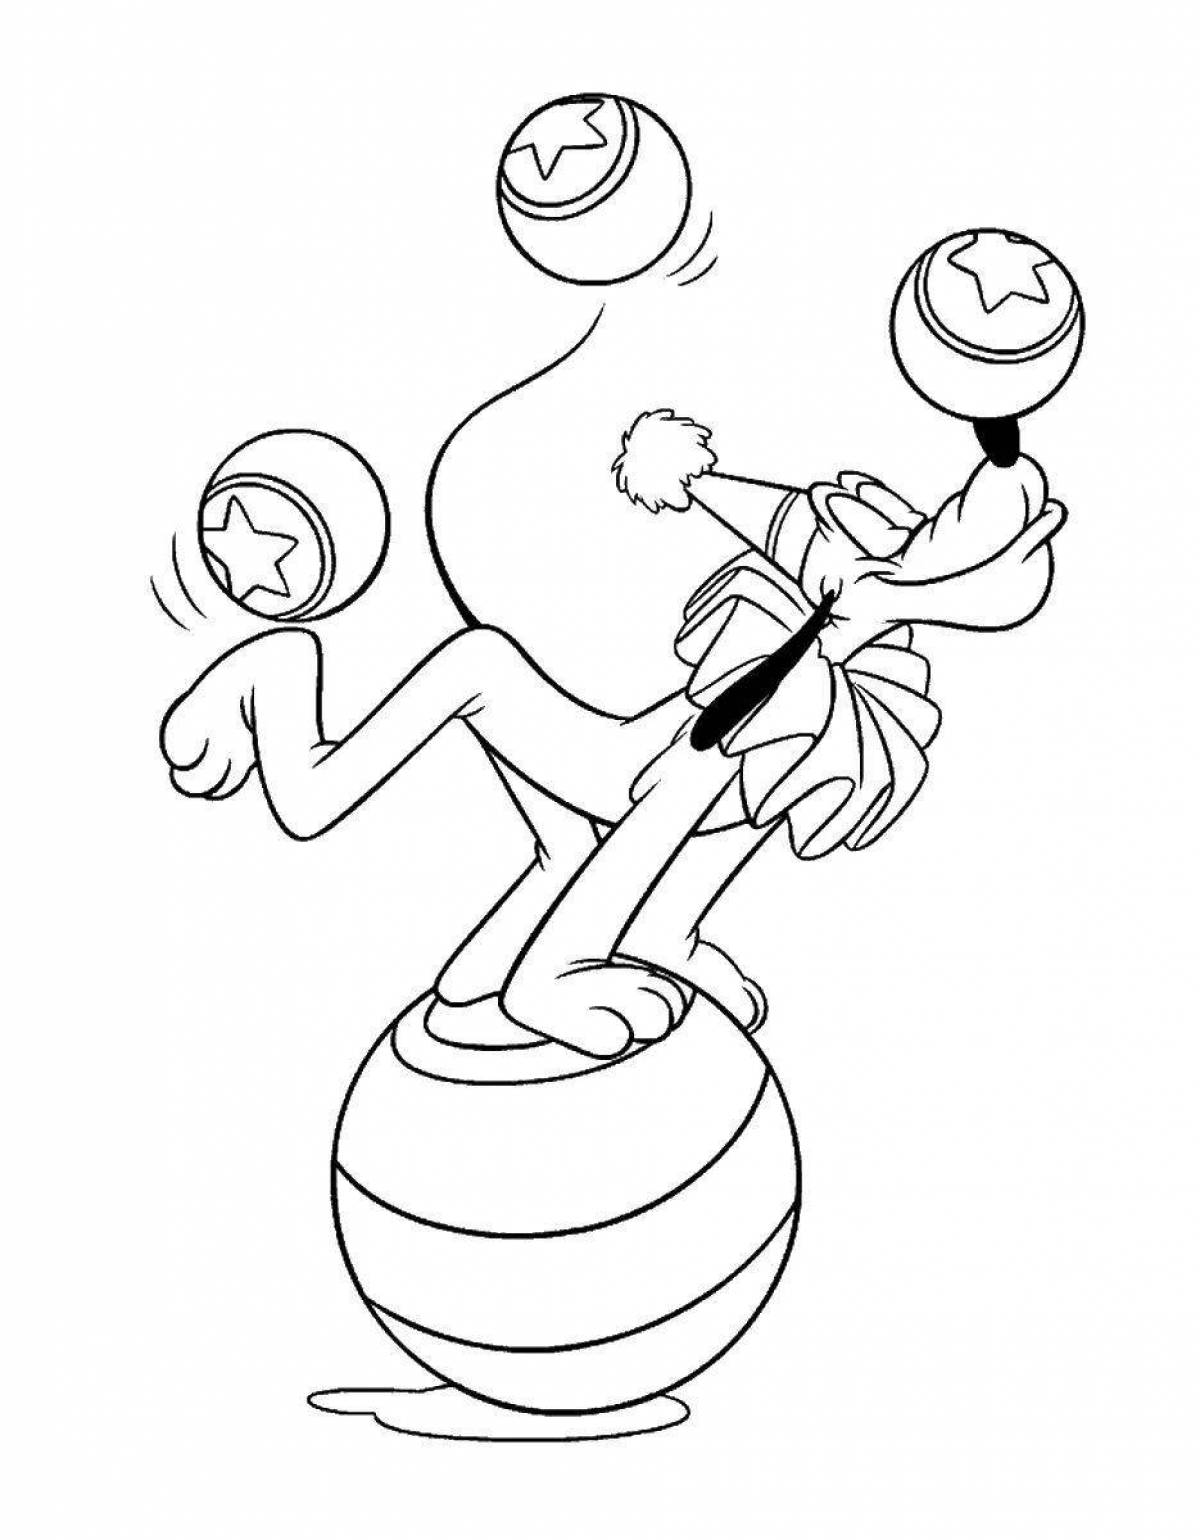 Coloring page acrobat in balance